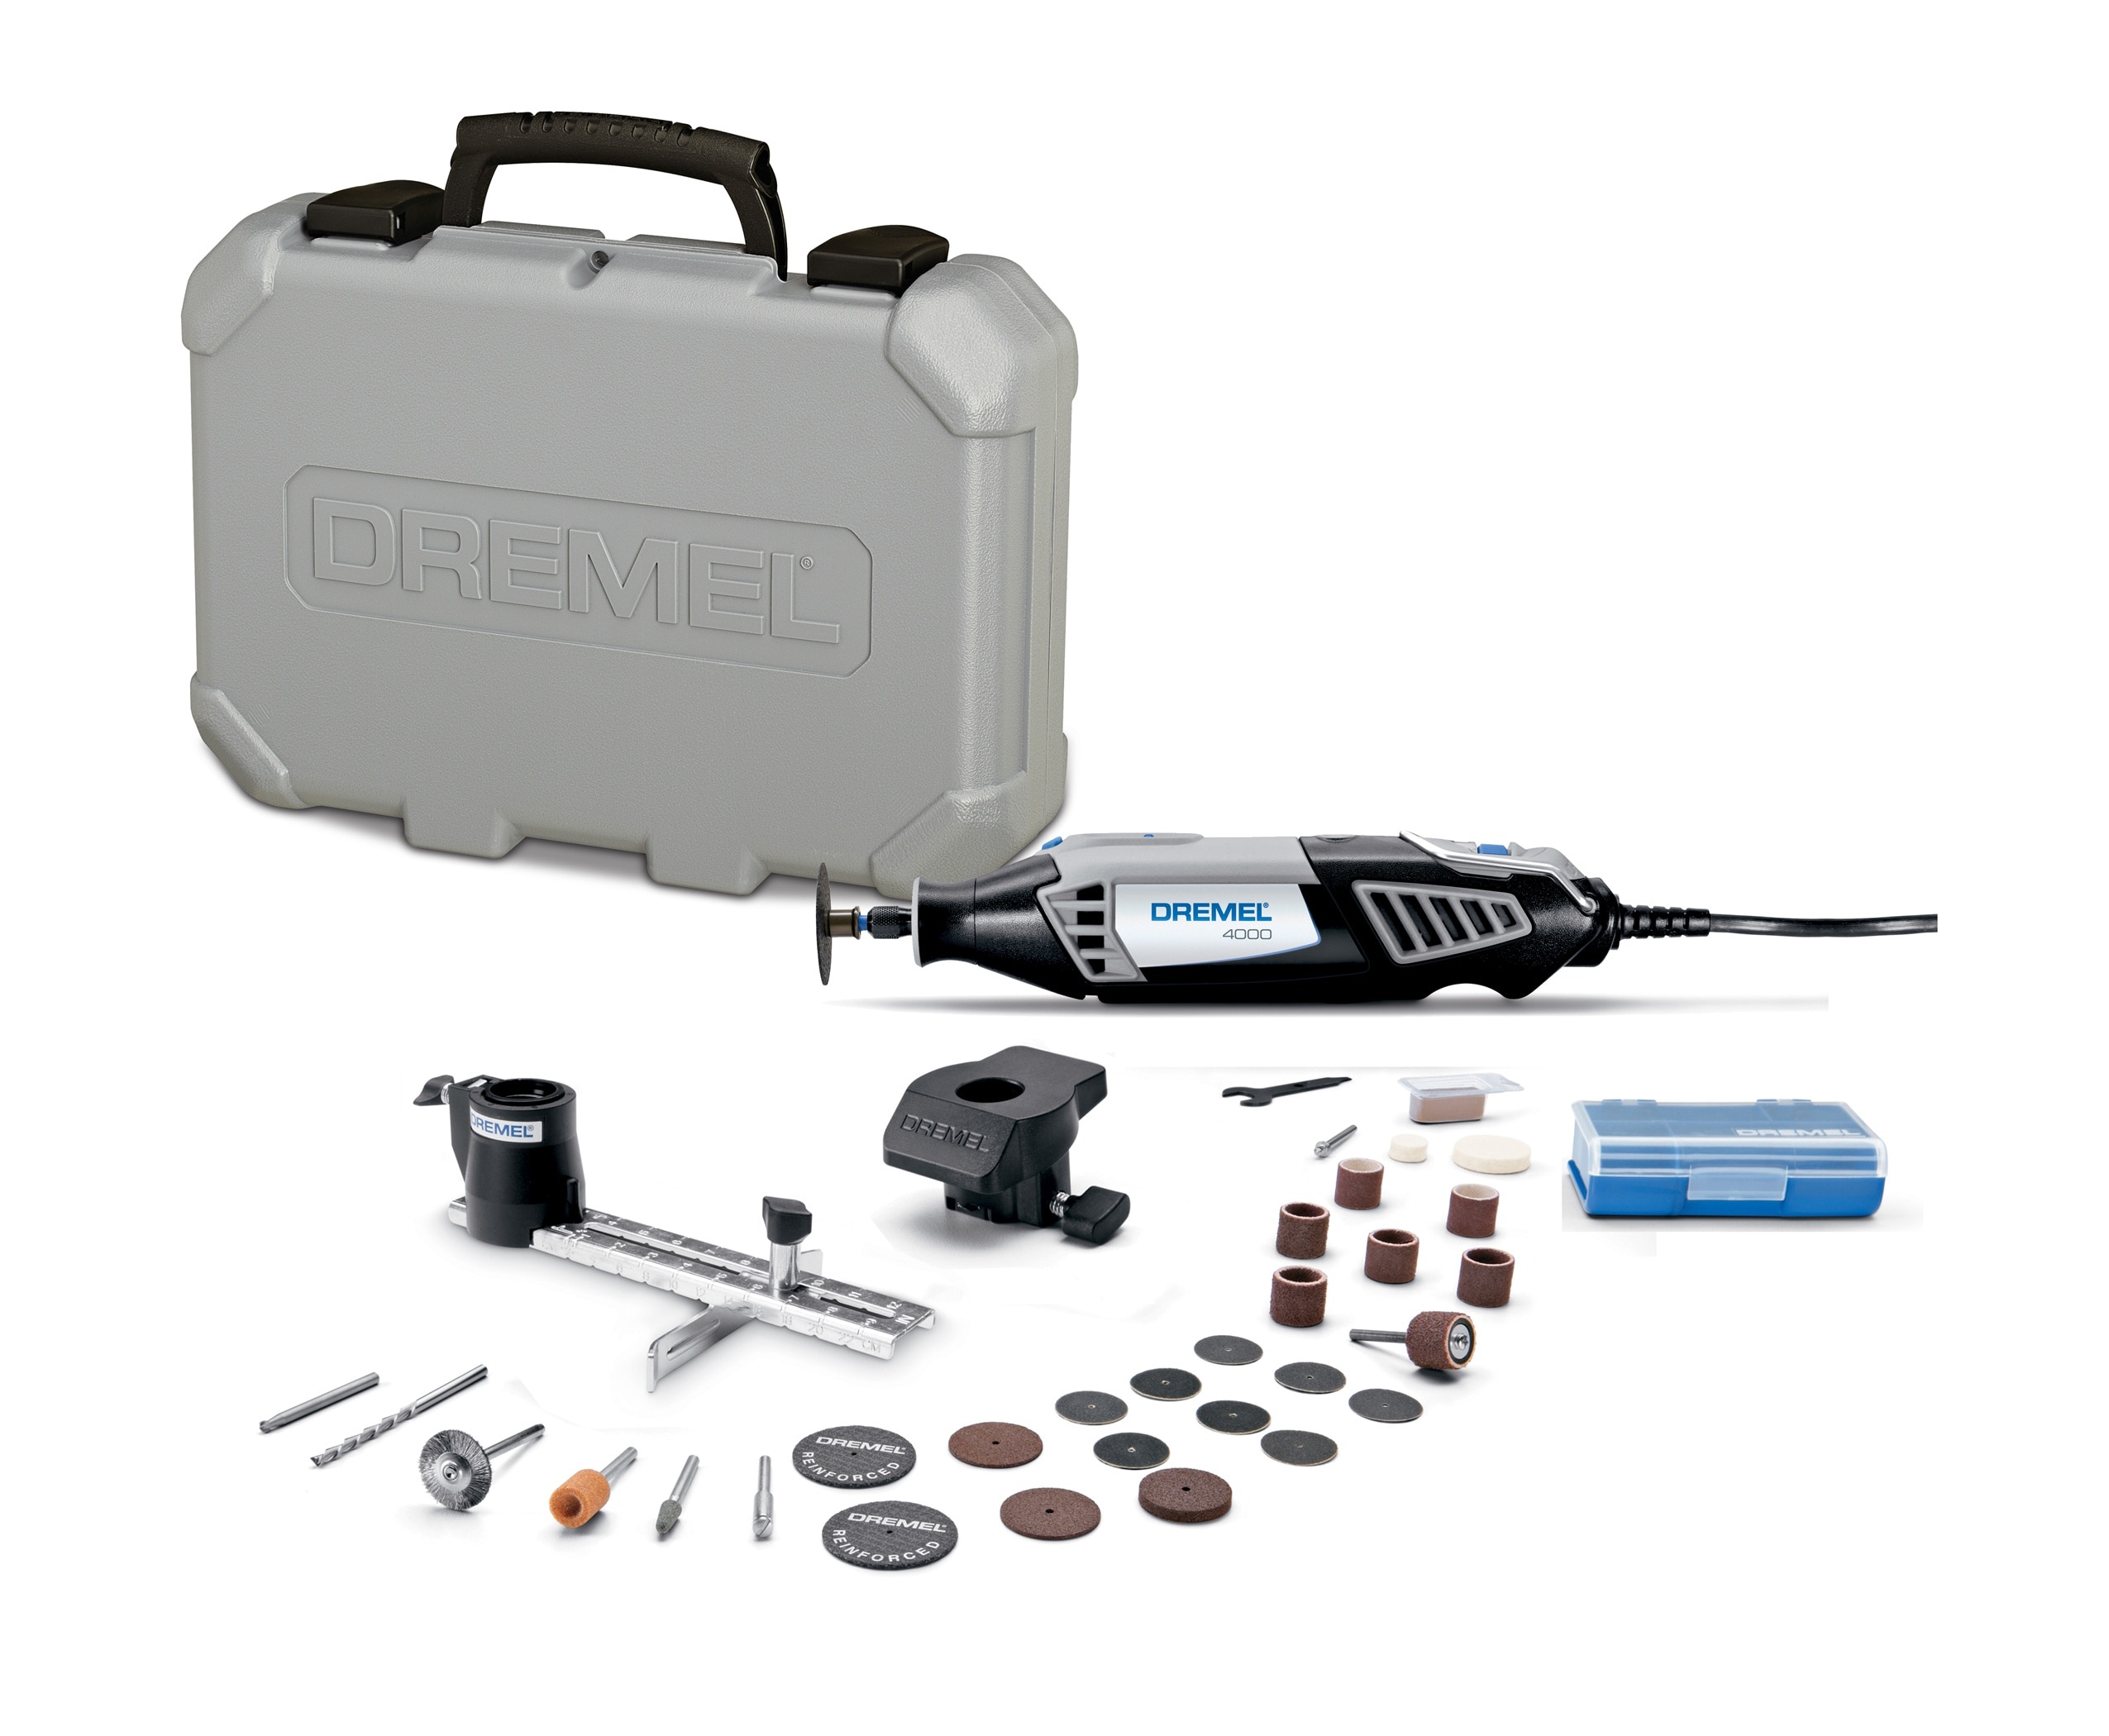 Dremel 4000 32-Piece Variable Speed 1.6-Amp Multipurpose Rotary with Hard Case the Rotary Tools department at Lowes.com